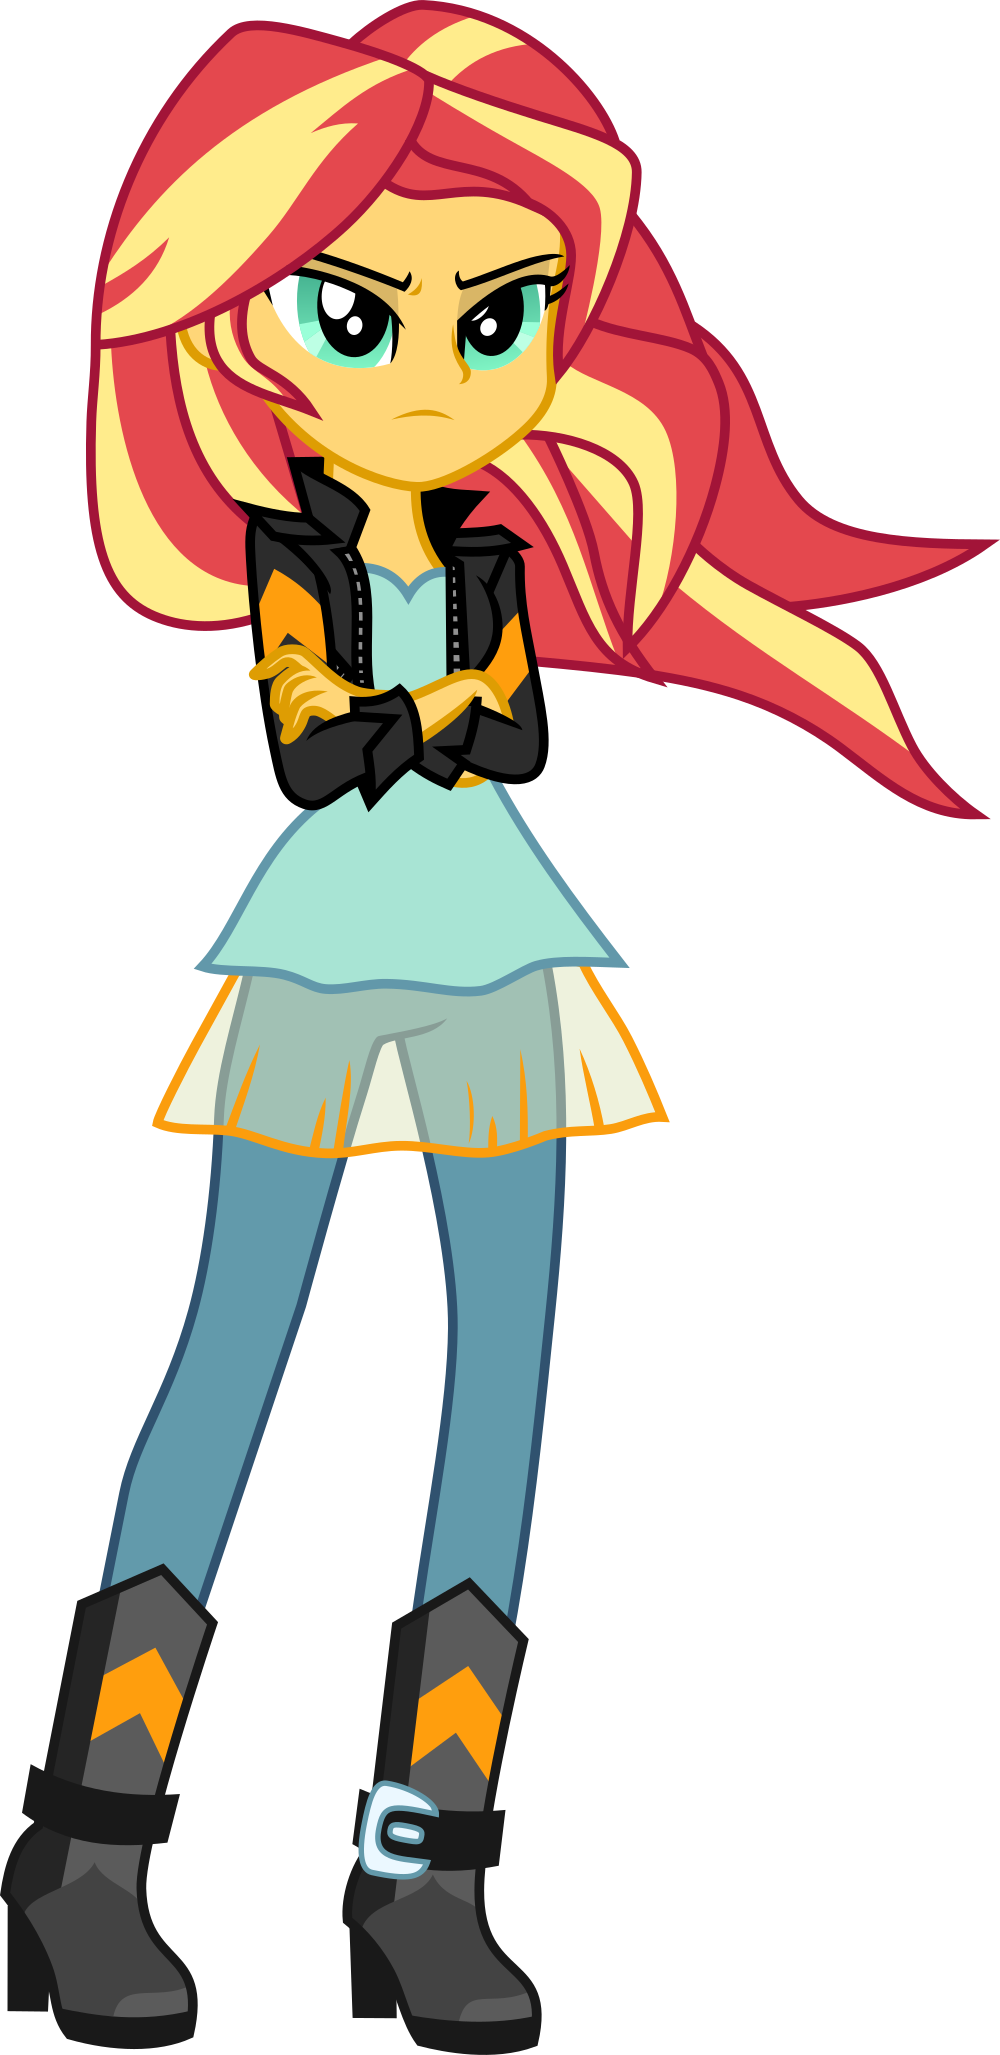 Uponia, Boots, Clothes, Crossed Arms, Equestria Girls, - Sunset Shimmer Mlp Friendship Games (1000x2055)